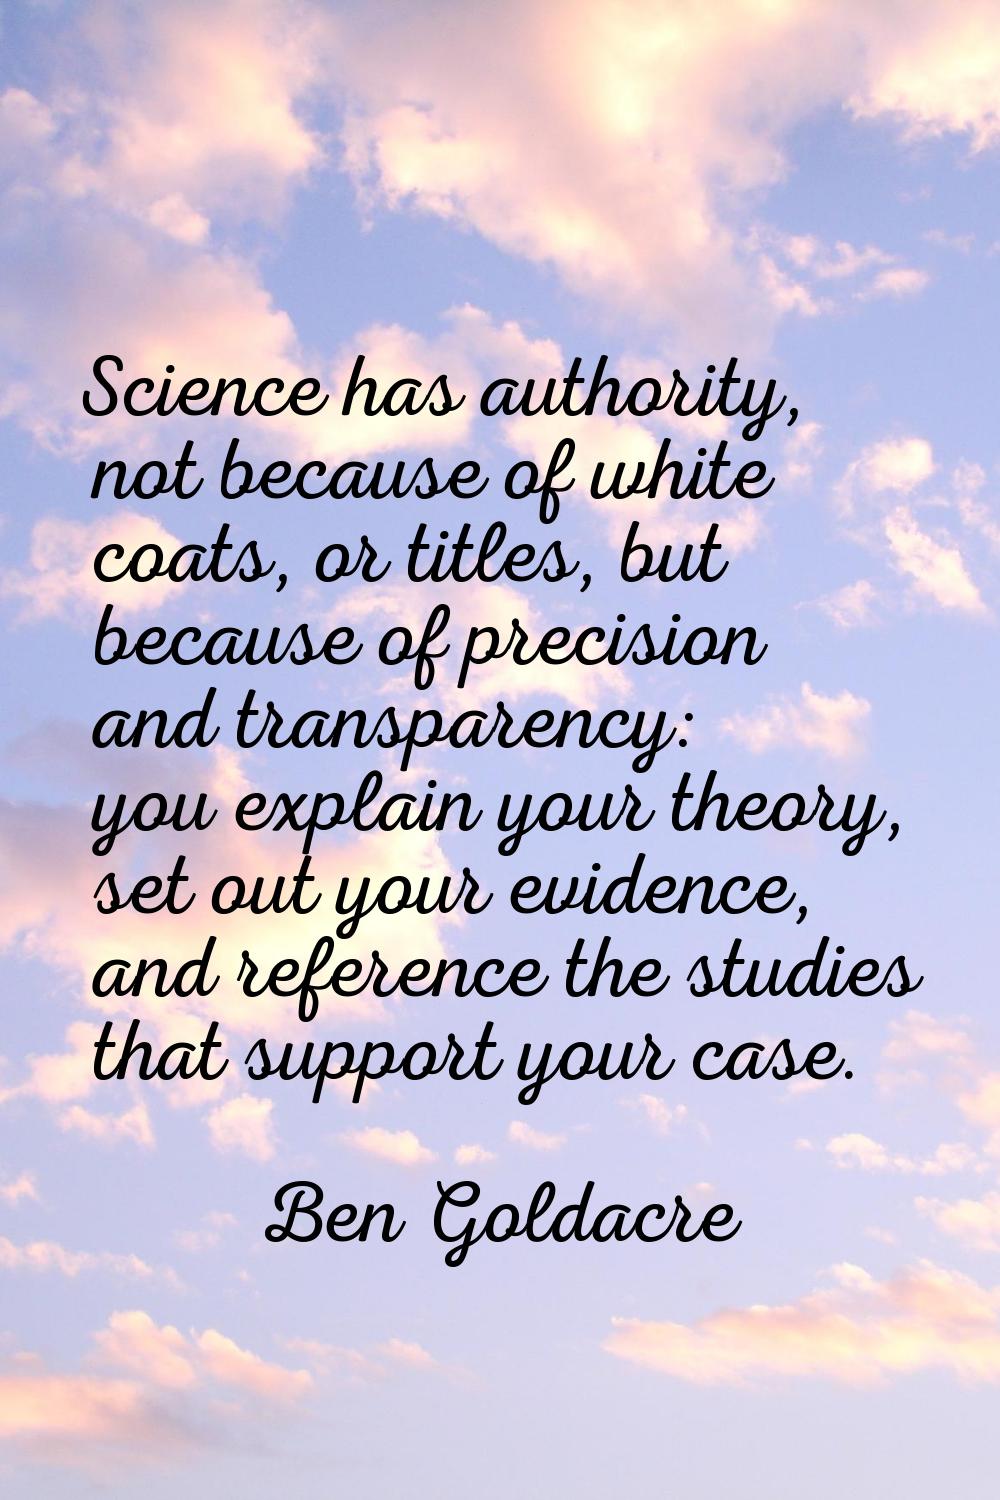 Science has authority, not because of white coats, or titles, but because of precision and transpar